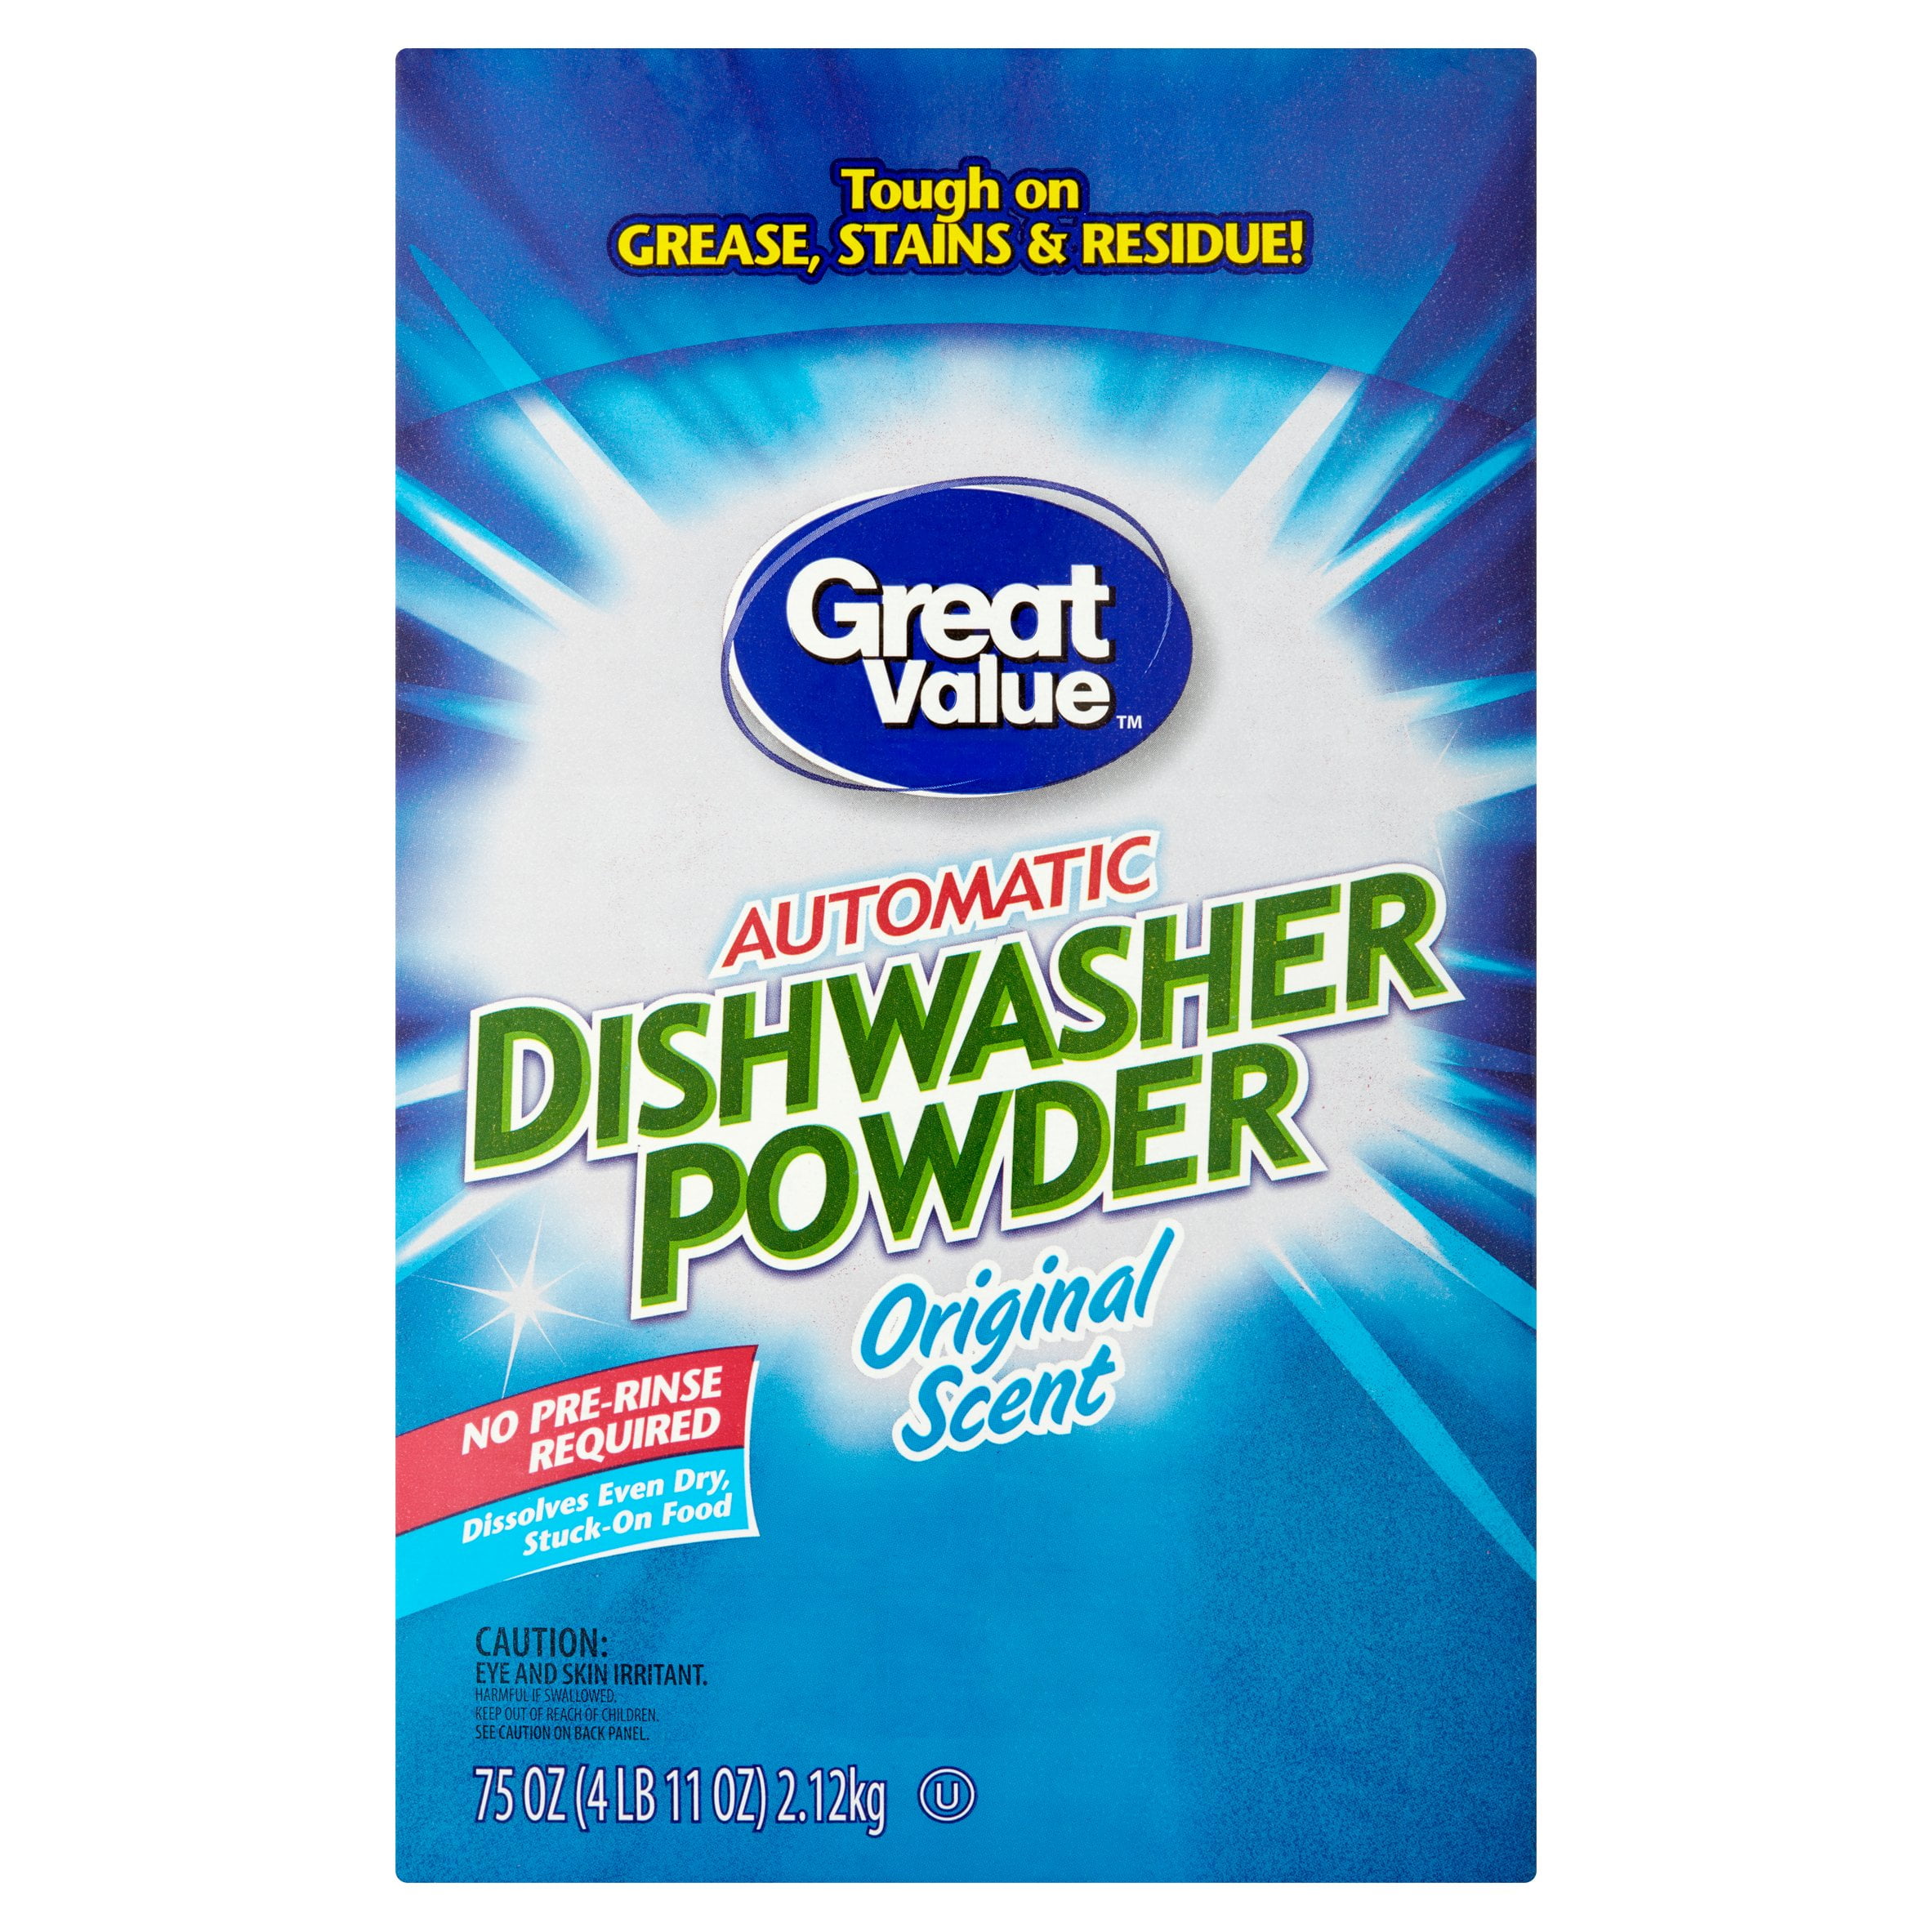 Great Value Automatic Dishwasher Pacs, Fresh Scent, 60 Count 